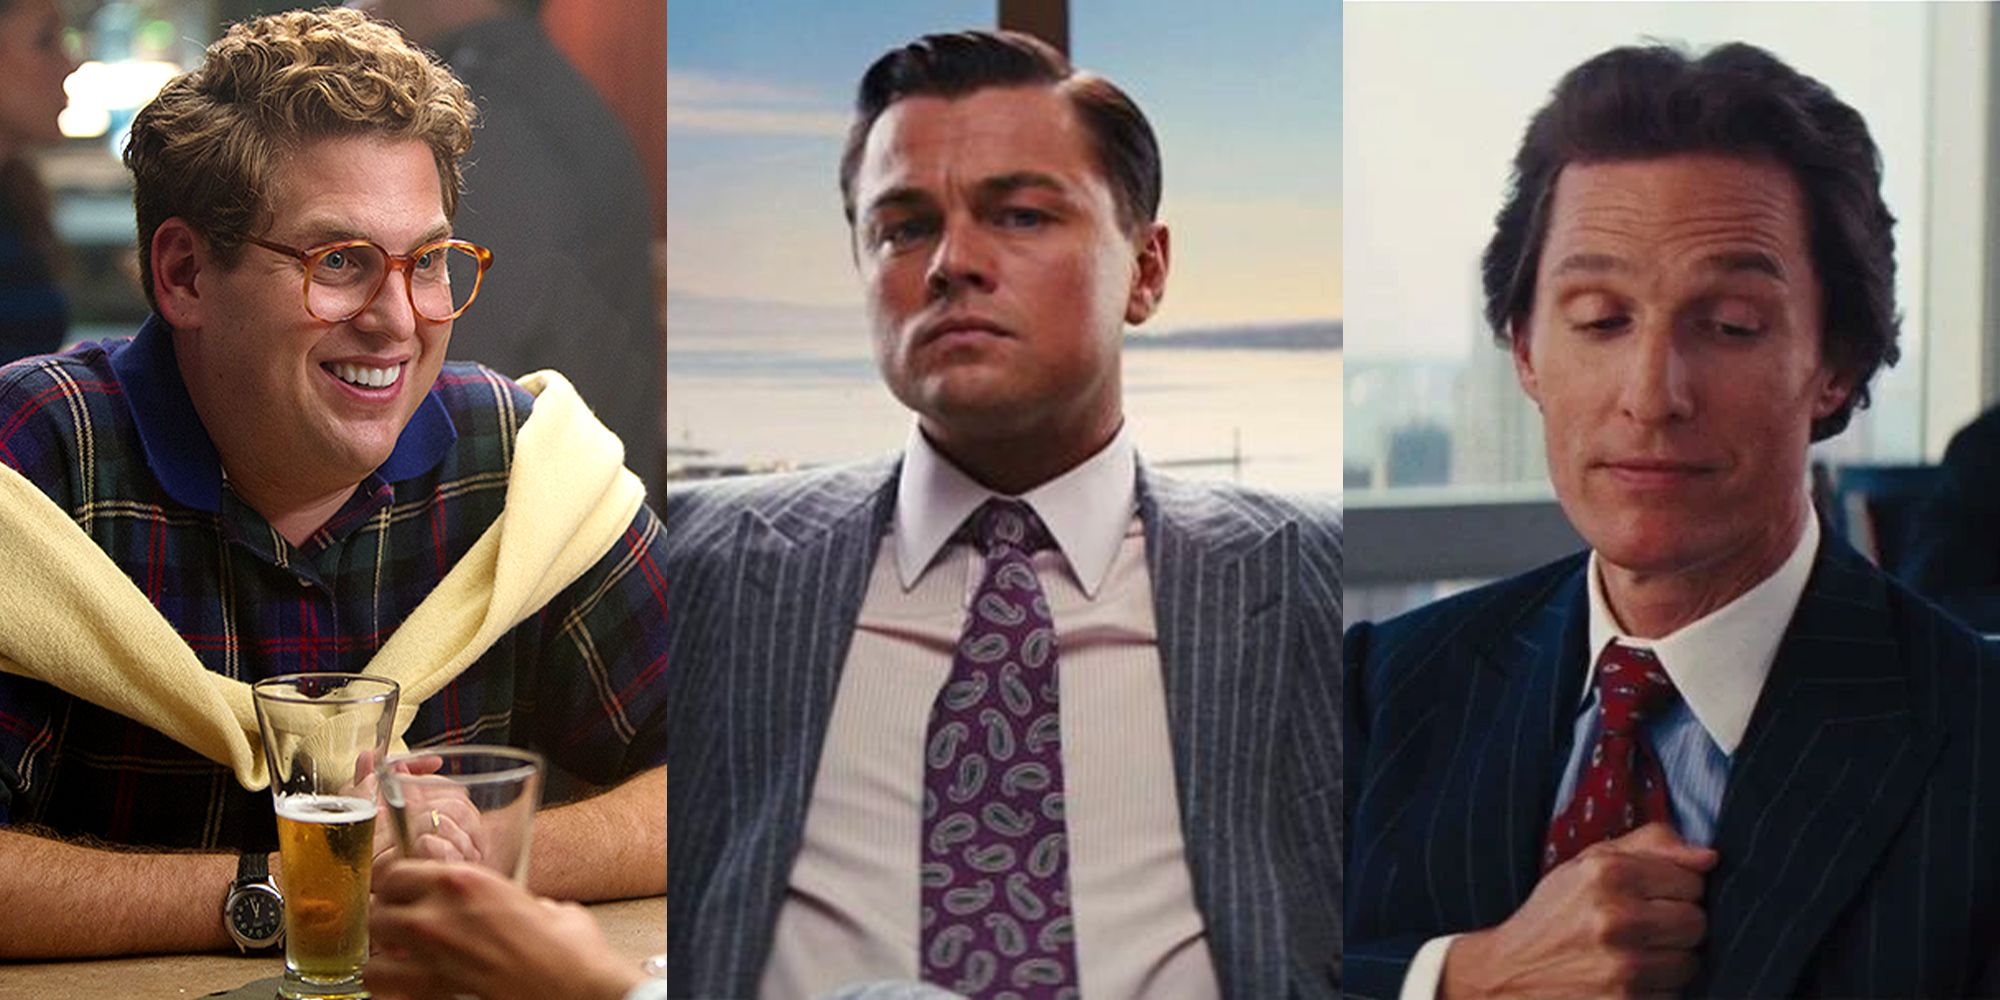 the wolf of wall street reddit link